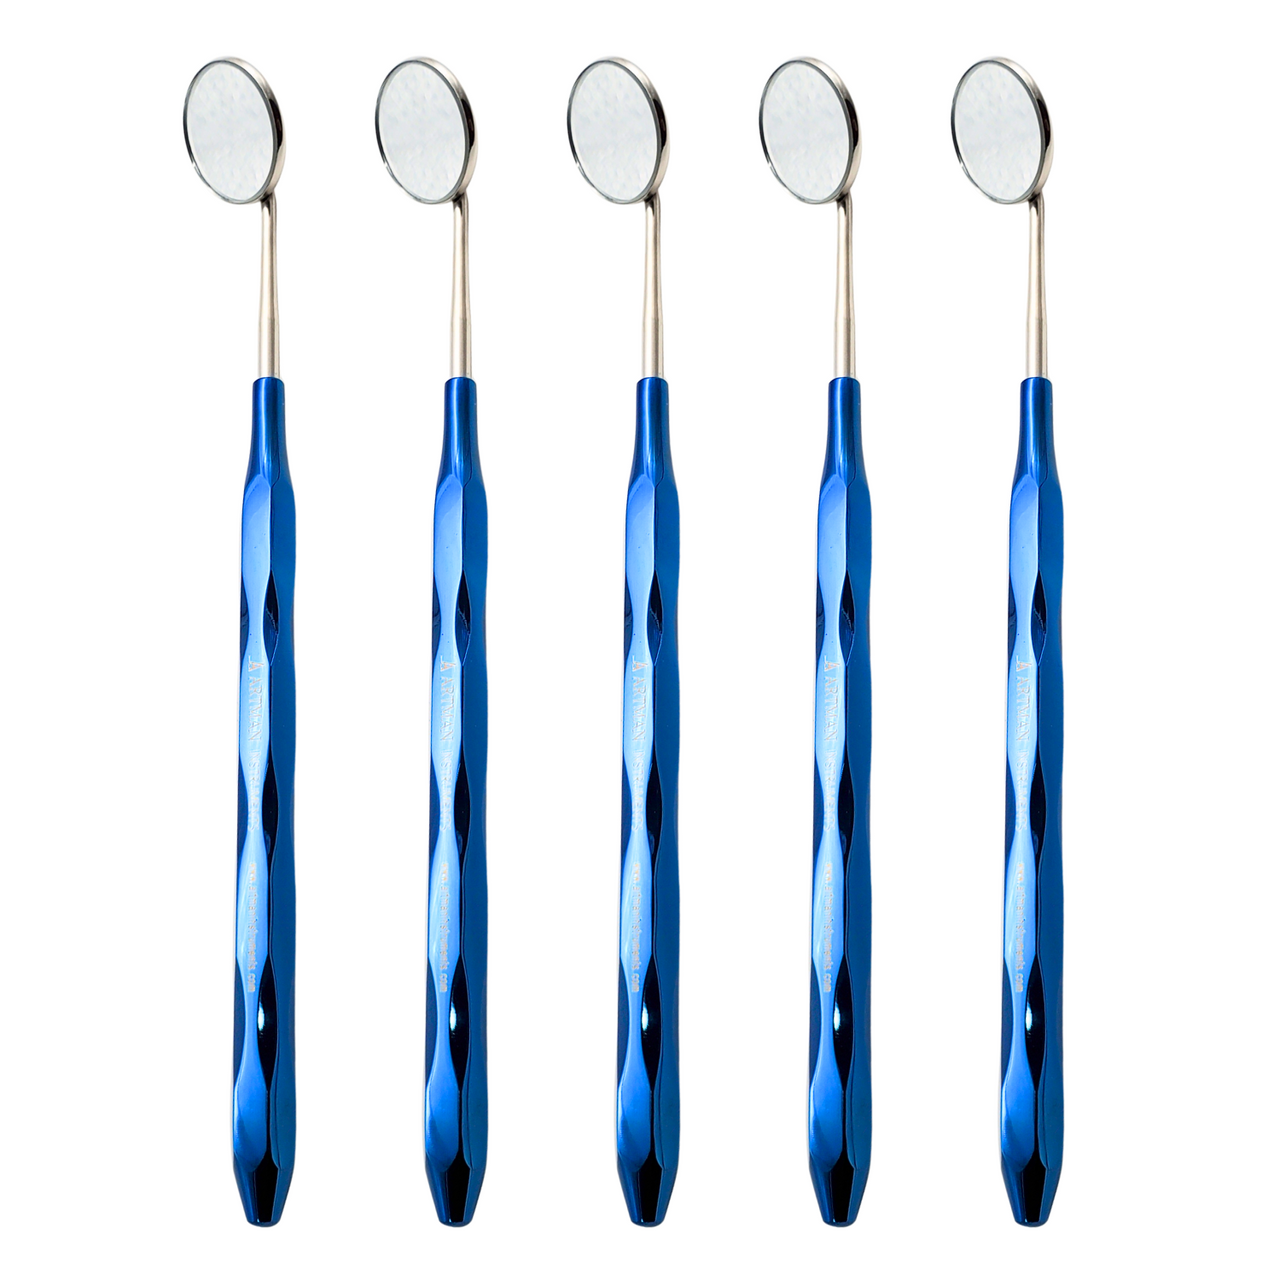 Dental Mirror Stainless Steel with Blue Plasma Handle, Set of 5 Dental Mirrors Front Surface Rhodium Plasma Coated Cone Socket Threading by ARTMAN